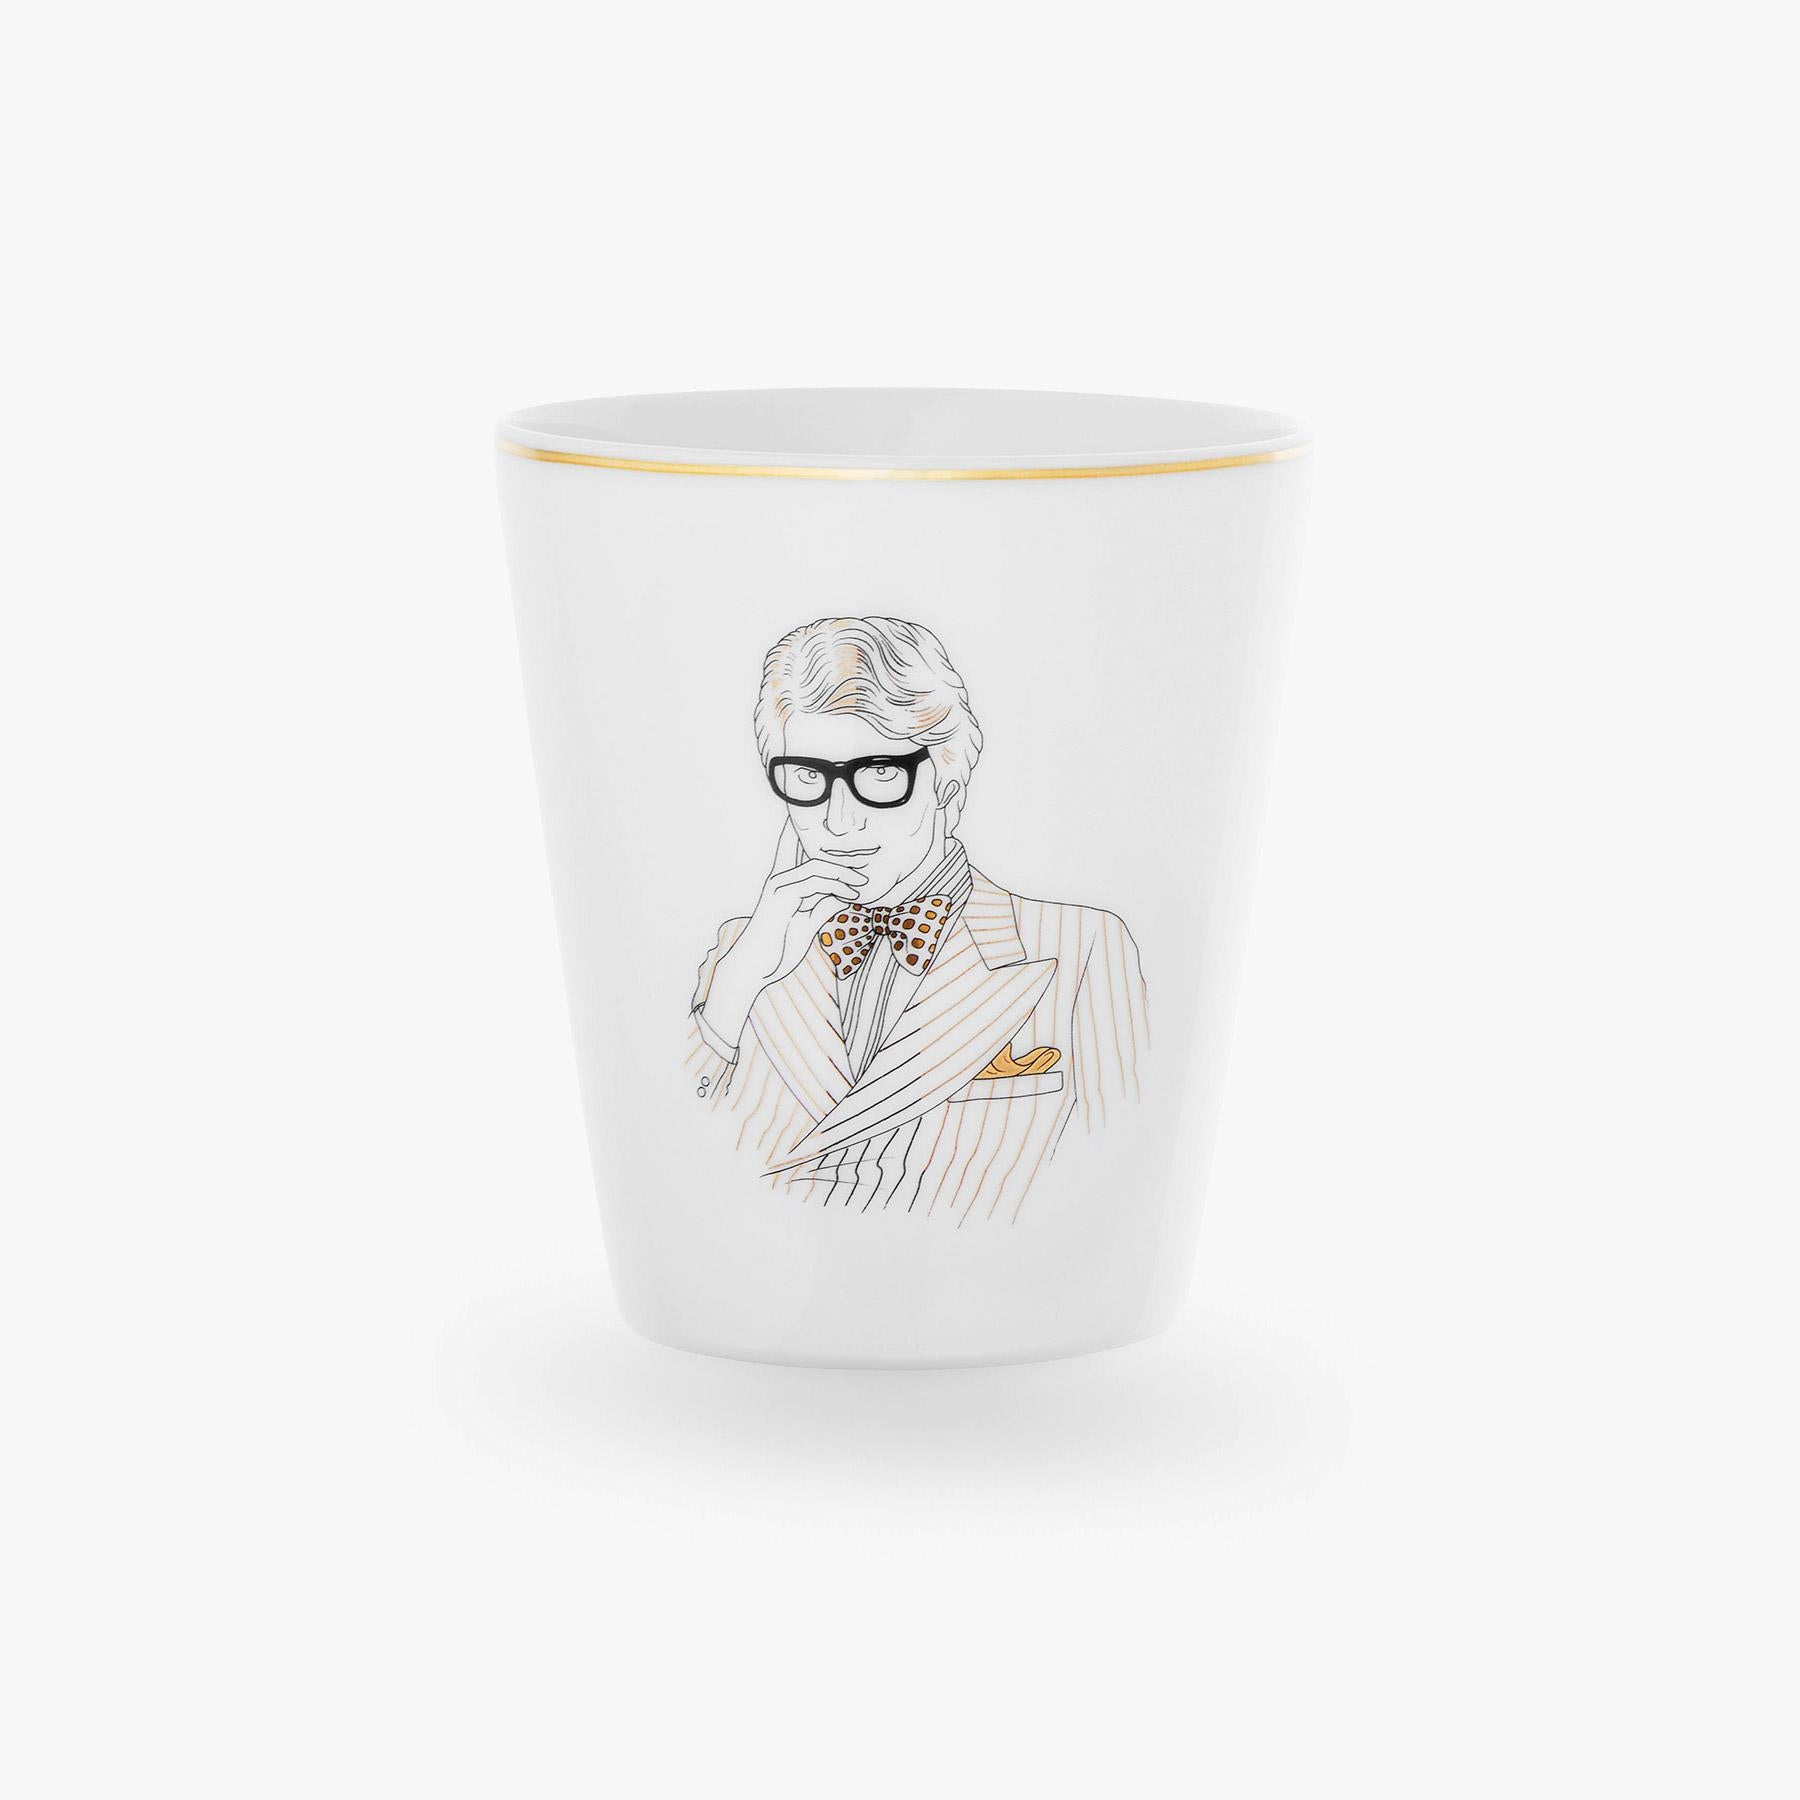 Maison Fragile and the Parisian illustrator artist Jean-Michel Tixier have joined together to create a collection that pays tribute to these men and women, key figures of history, who have made Paris as we know it.

Porcelain of Limoges extra